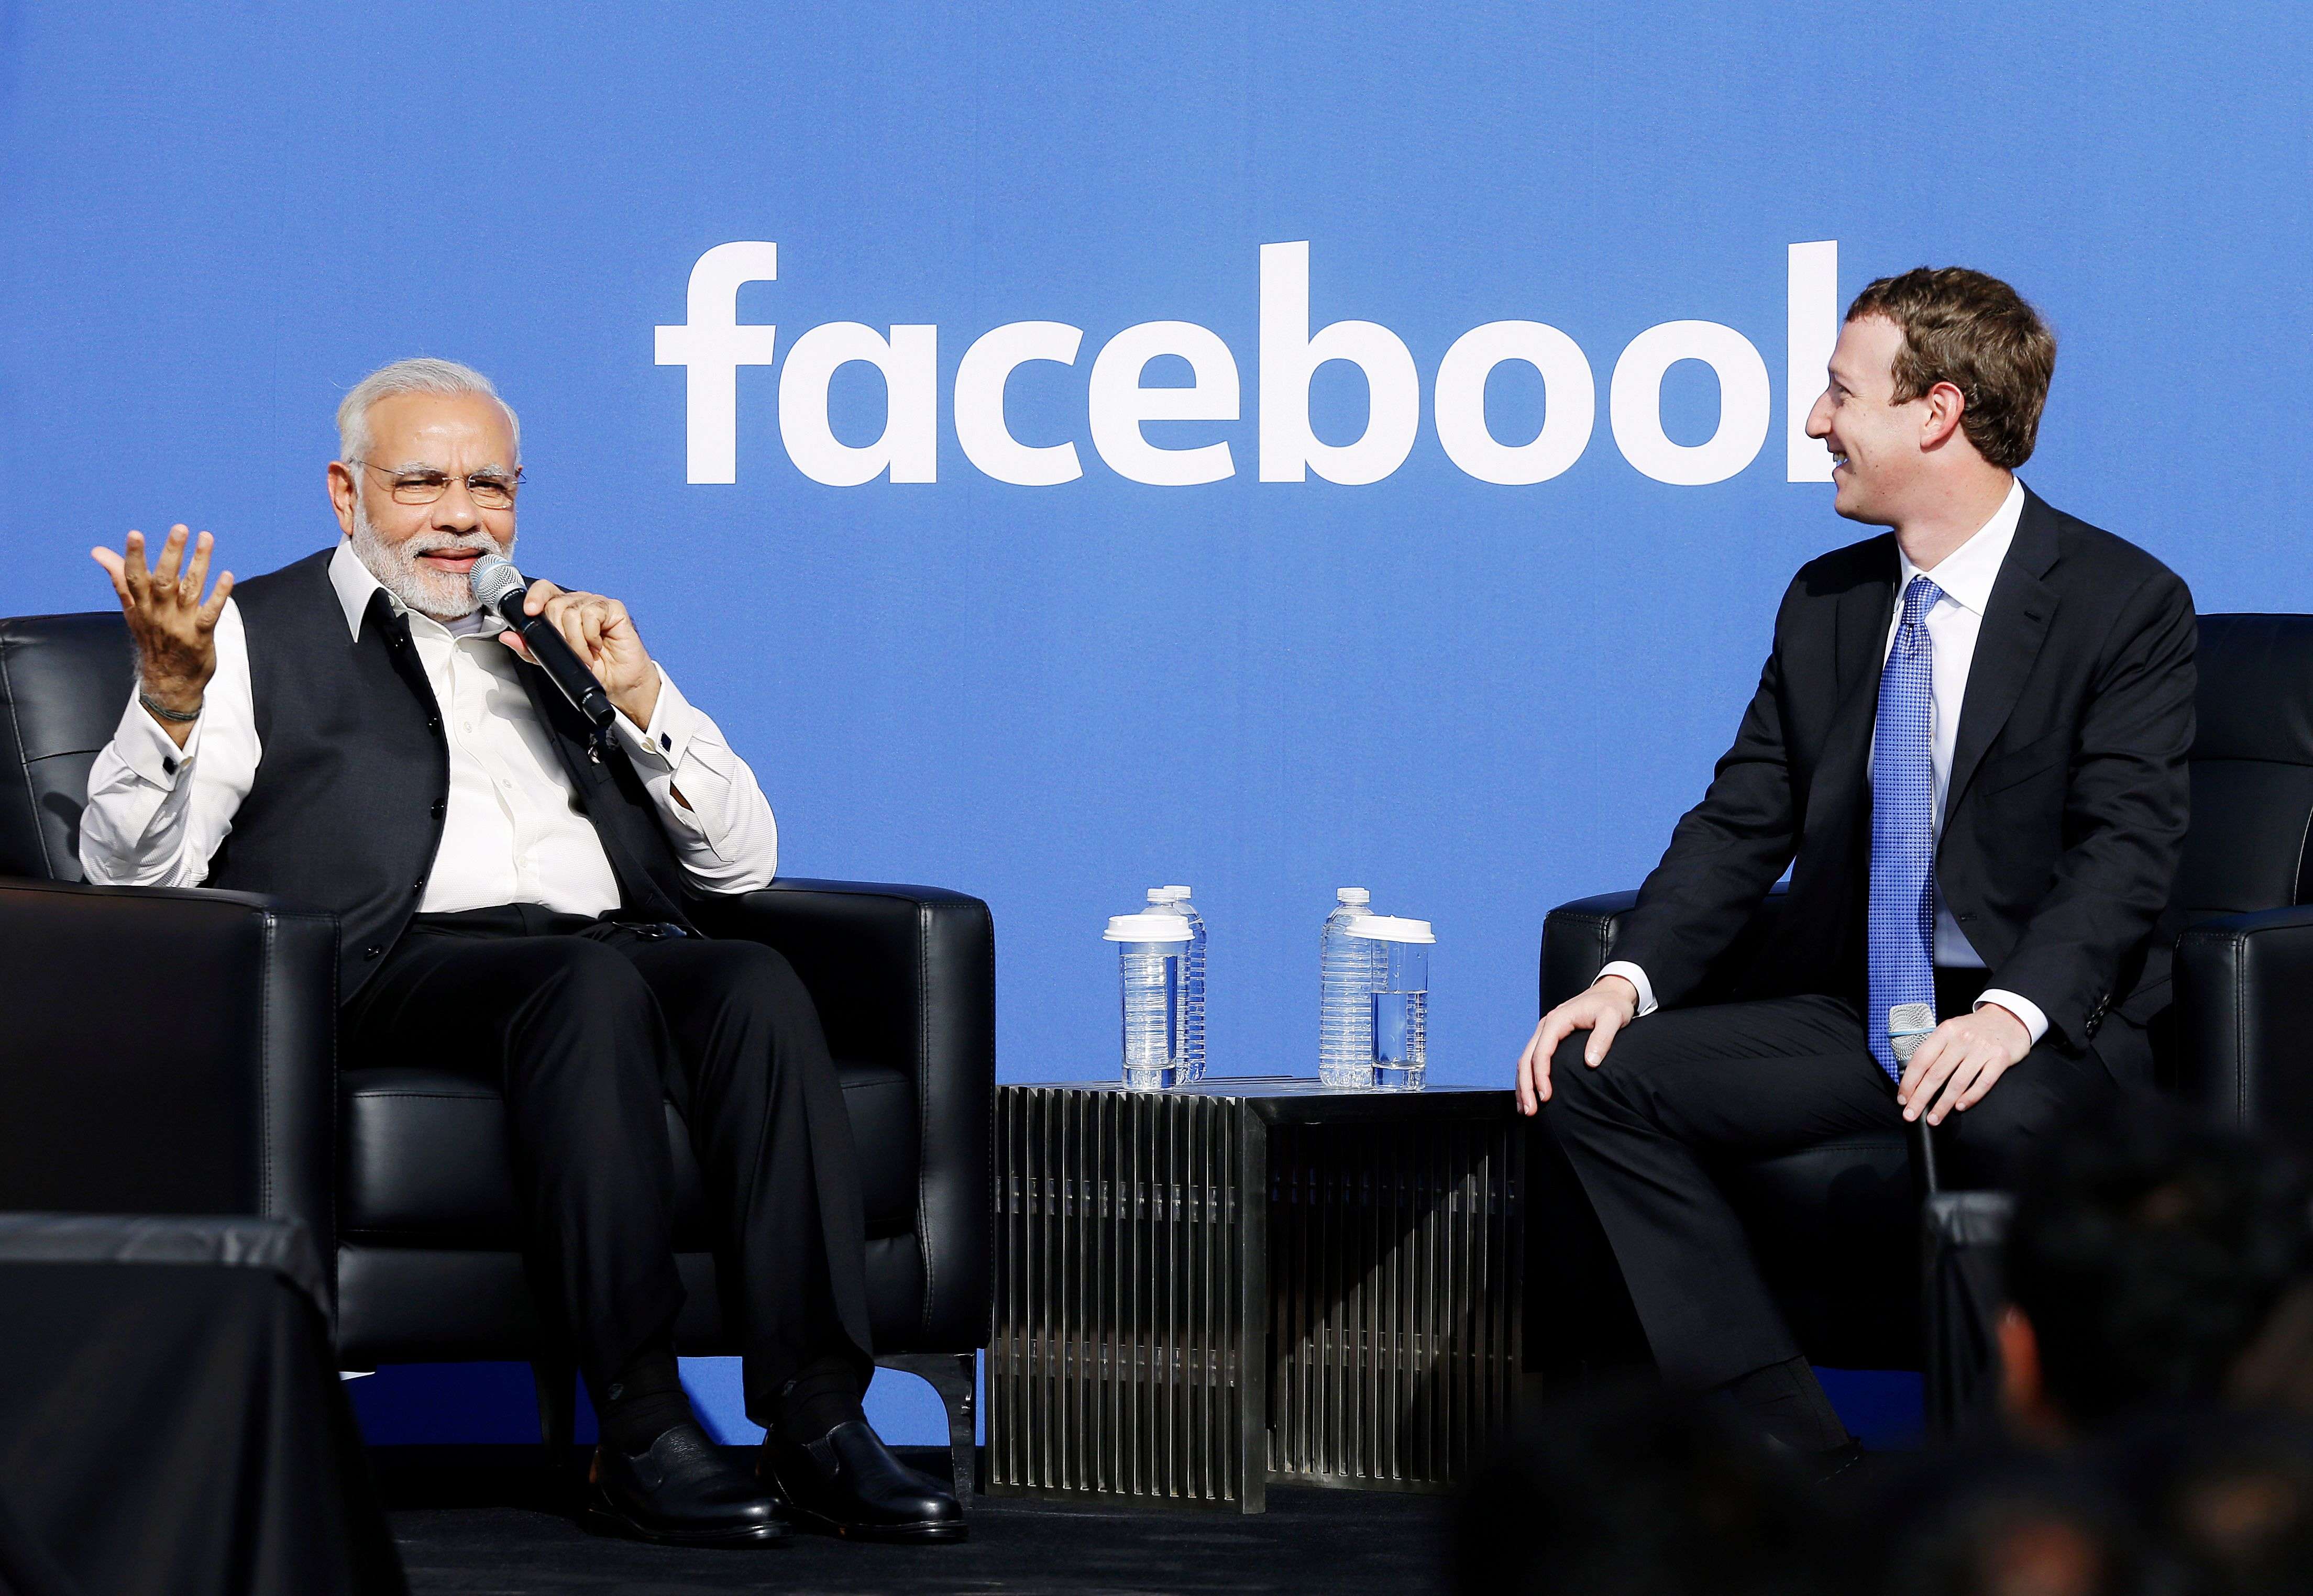 Prime Minister of India Narendra Modi, left, speaks next to Facebook CEO Mark Zuckerberg at Facebook in Menlo Park, Calif., Sunday, Sept. 27, 2015.  A rare visit by Indian Prime Minister Narendra Modi this weekend has captivated his extensive fan club in the area and commanded the attention of major U.S. technology companies eager to extend their reach into a promising overseas market. (AP Photo/Jeff Chiu)